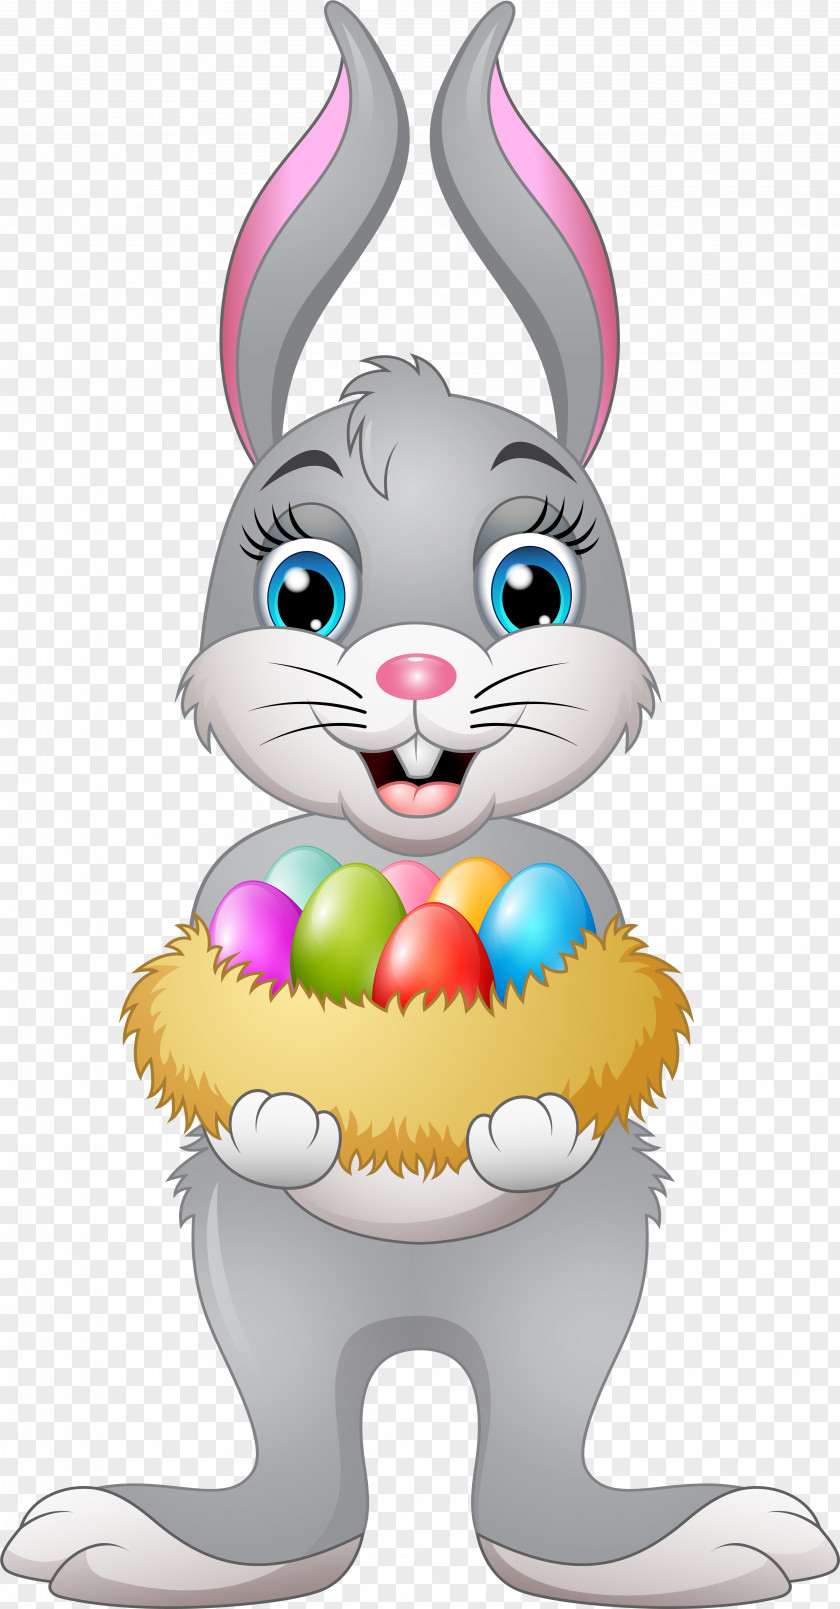 Whiskers Rabbits And Hares Easter Egg Cartoon PNG